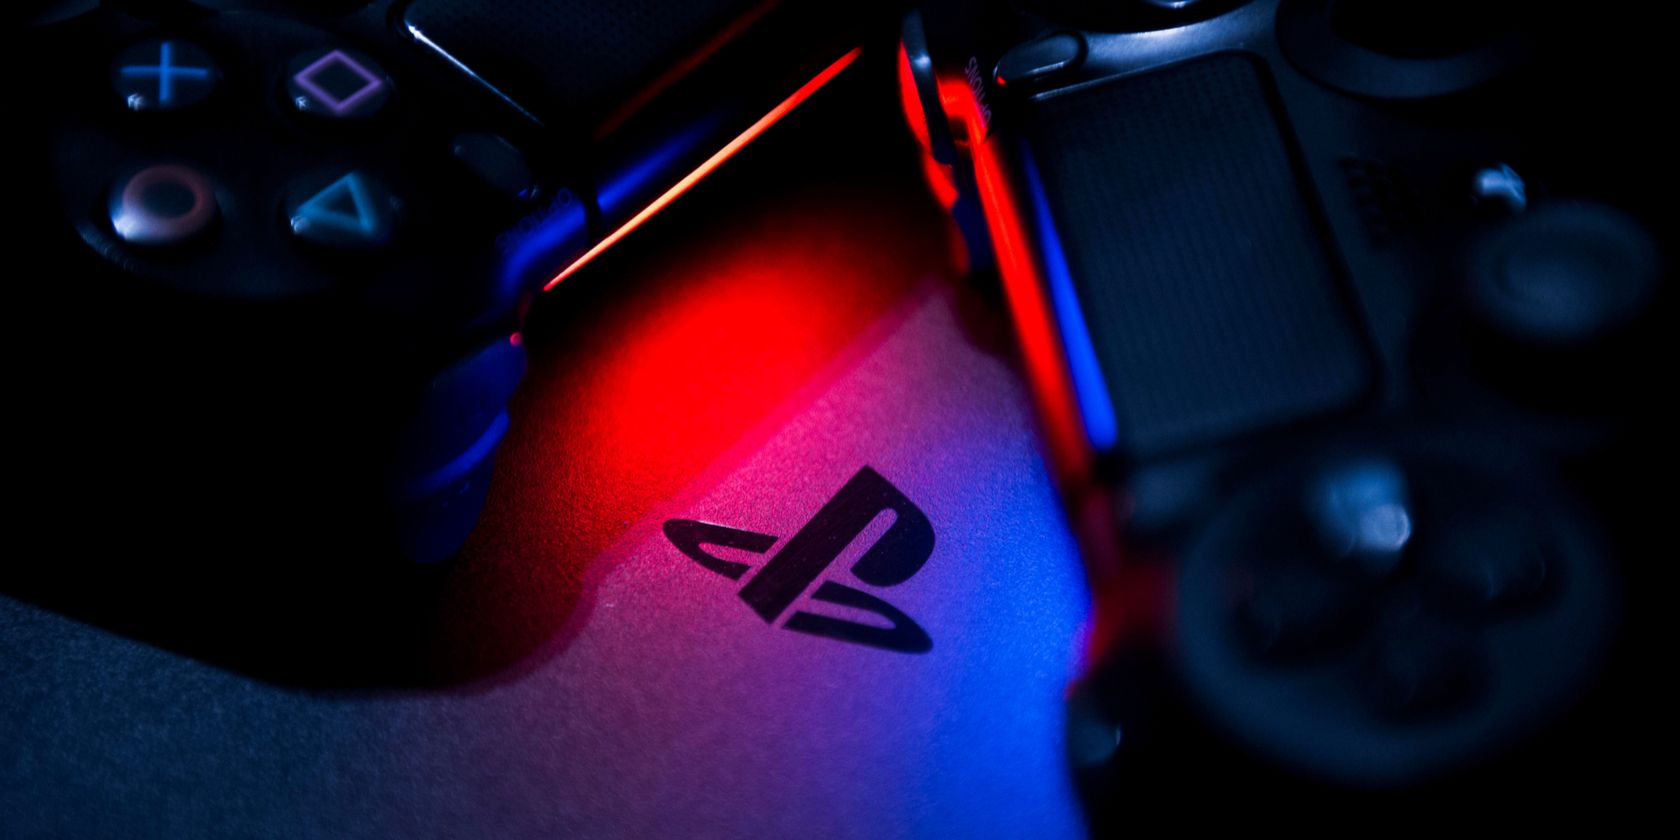 PlayStation logo between two PS4 controllers